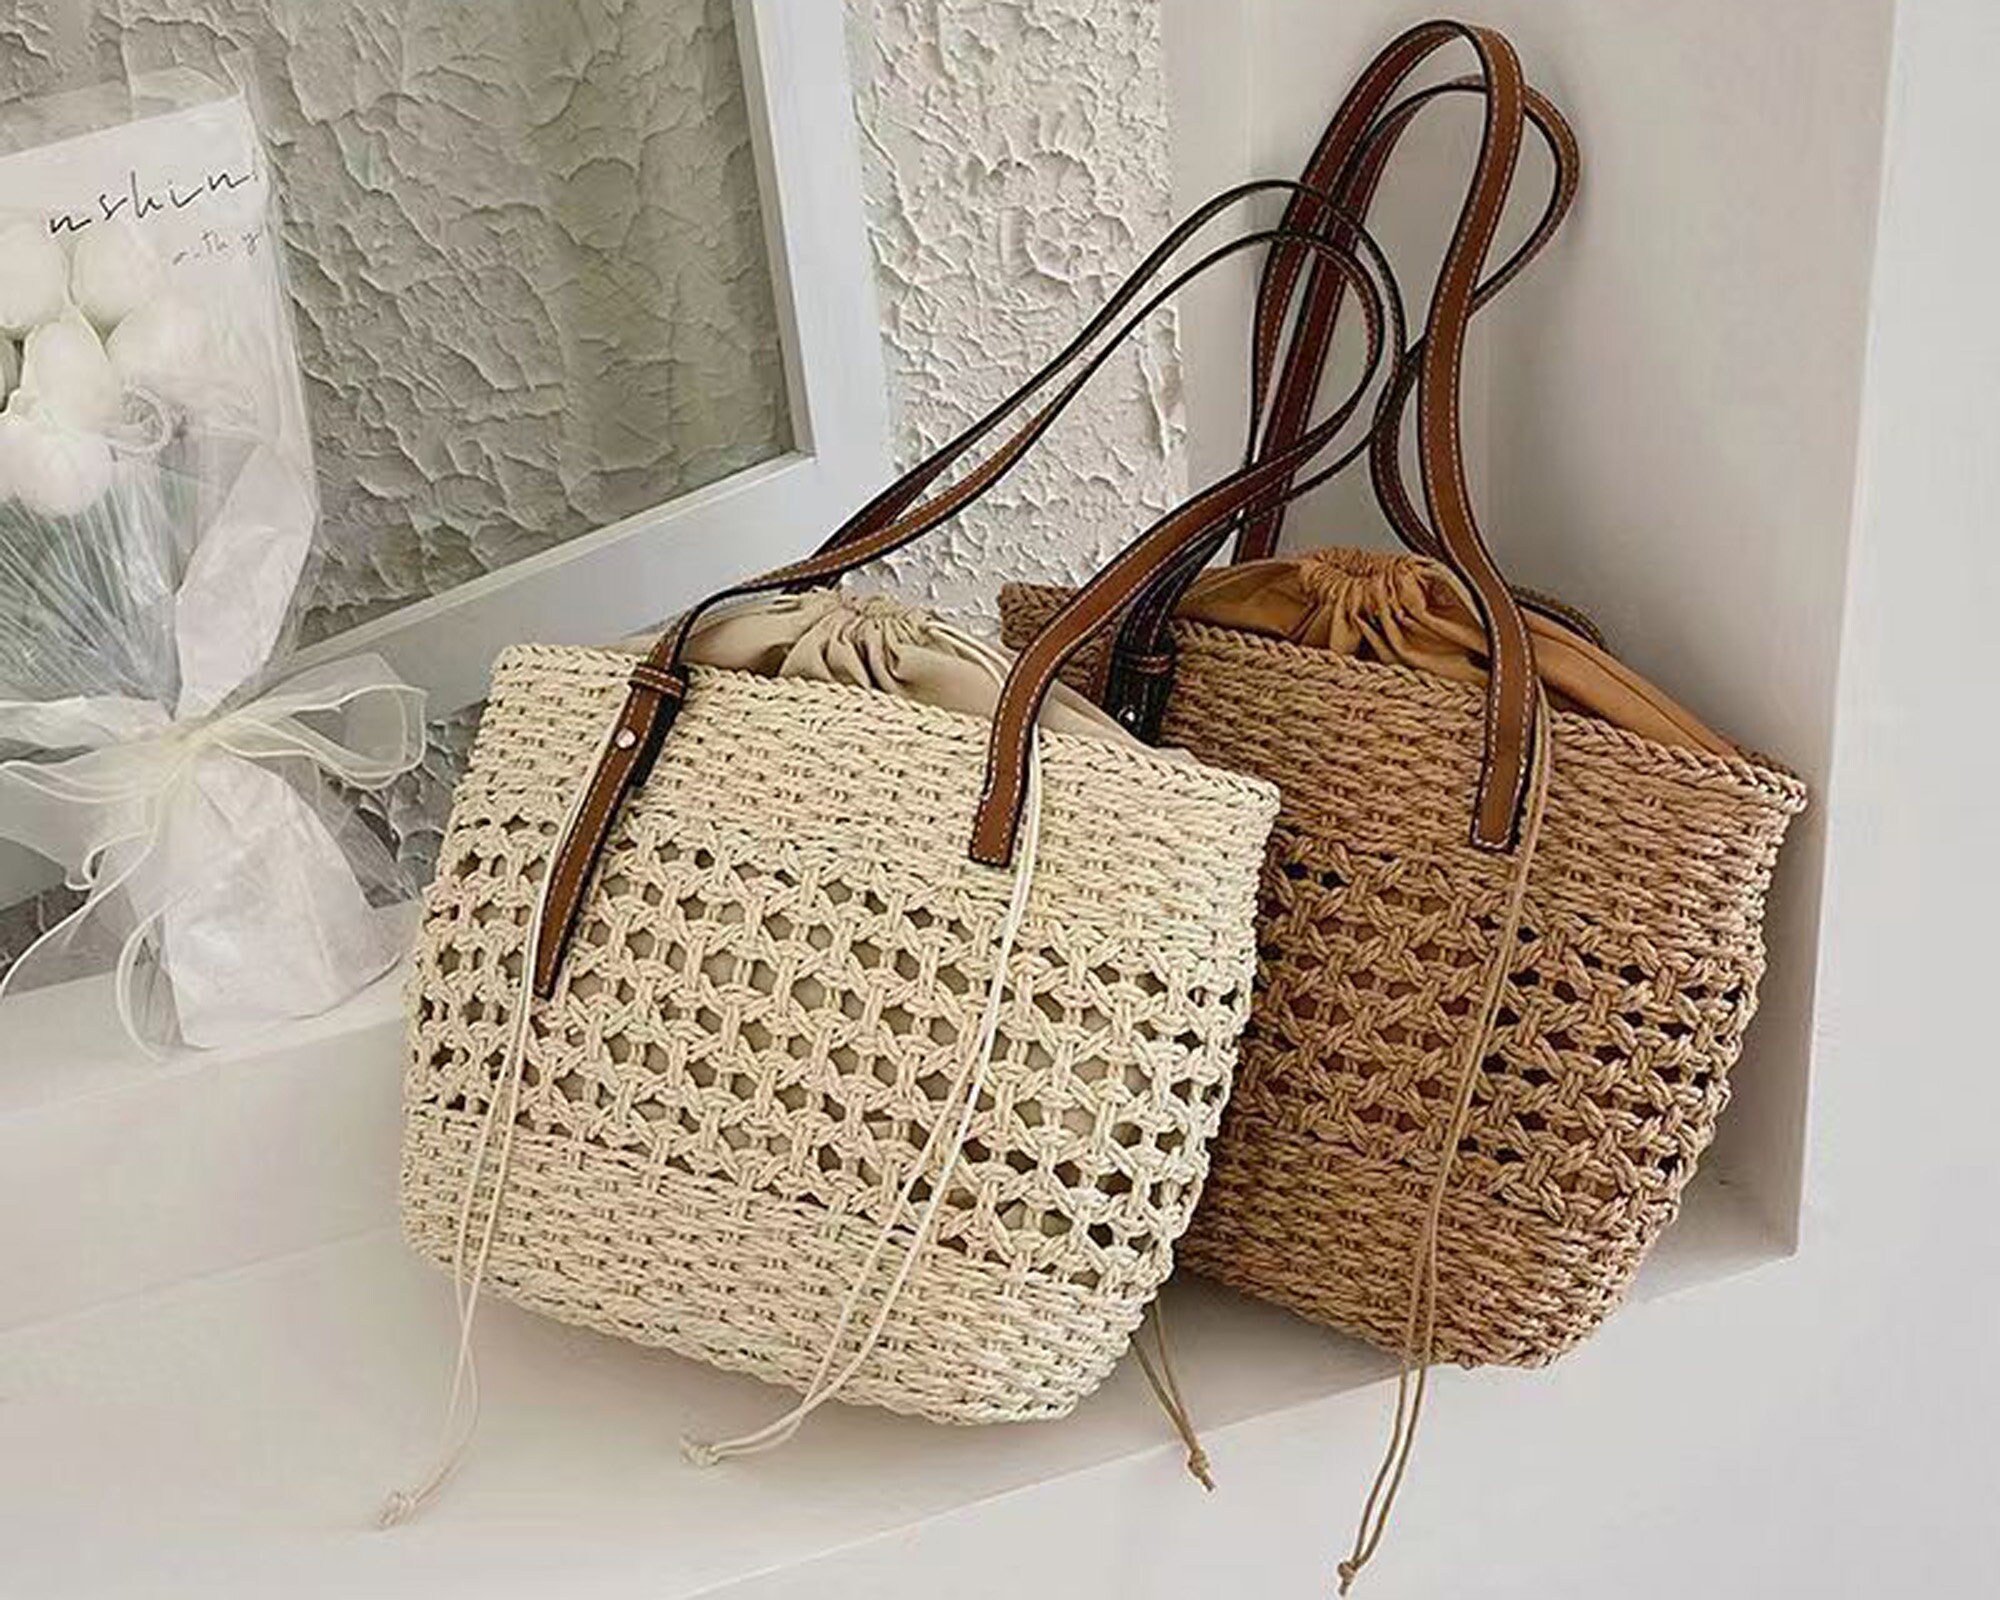 50 % OFF Straw Beach Bag With Leather Strap Straw Backpack Hipster Backpack  Boho Backpack -  Norway